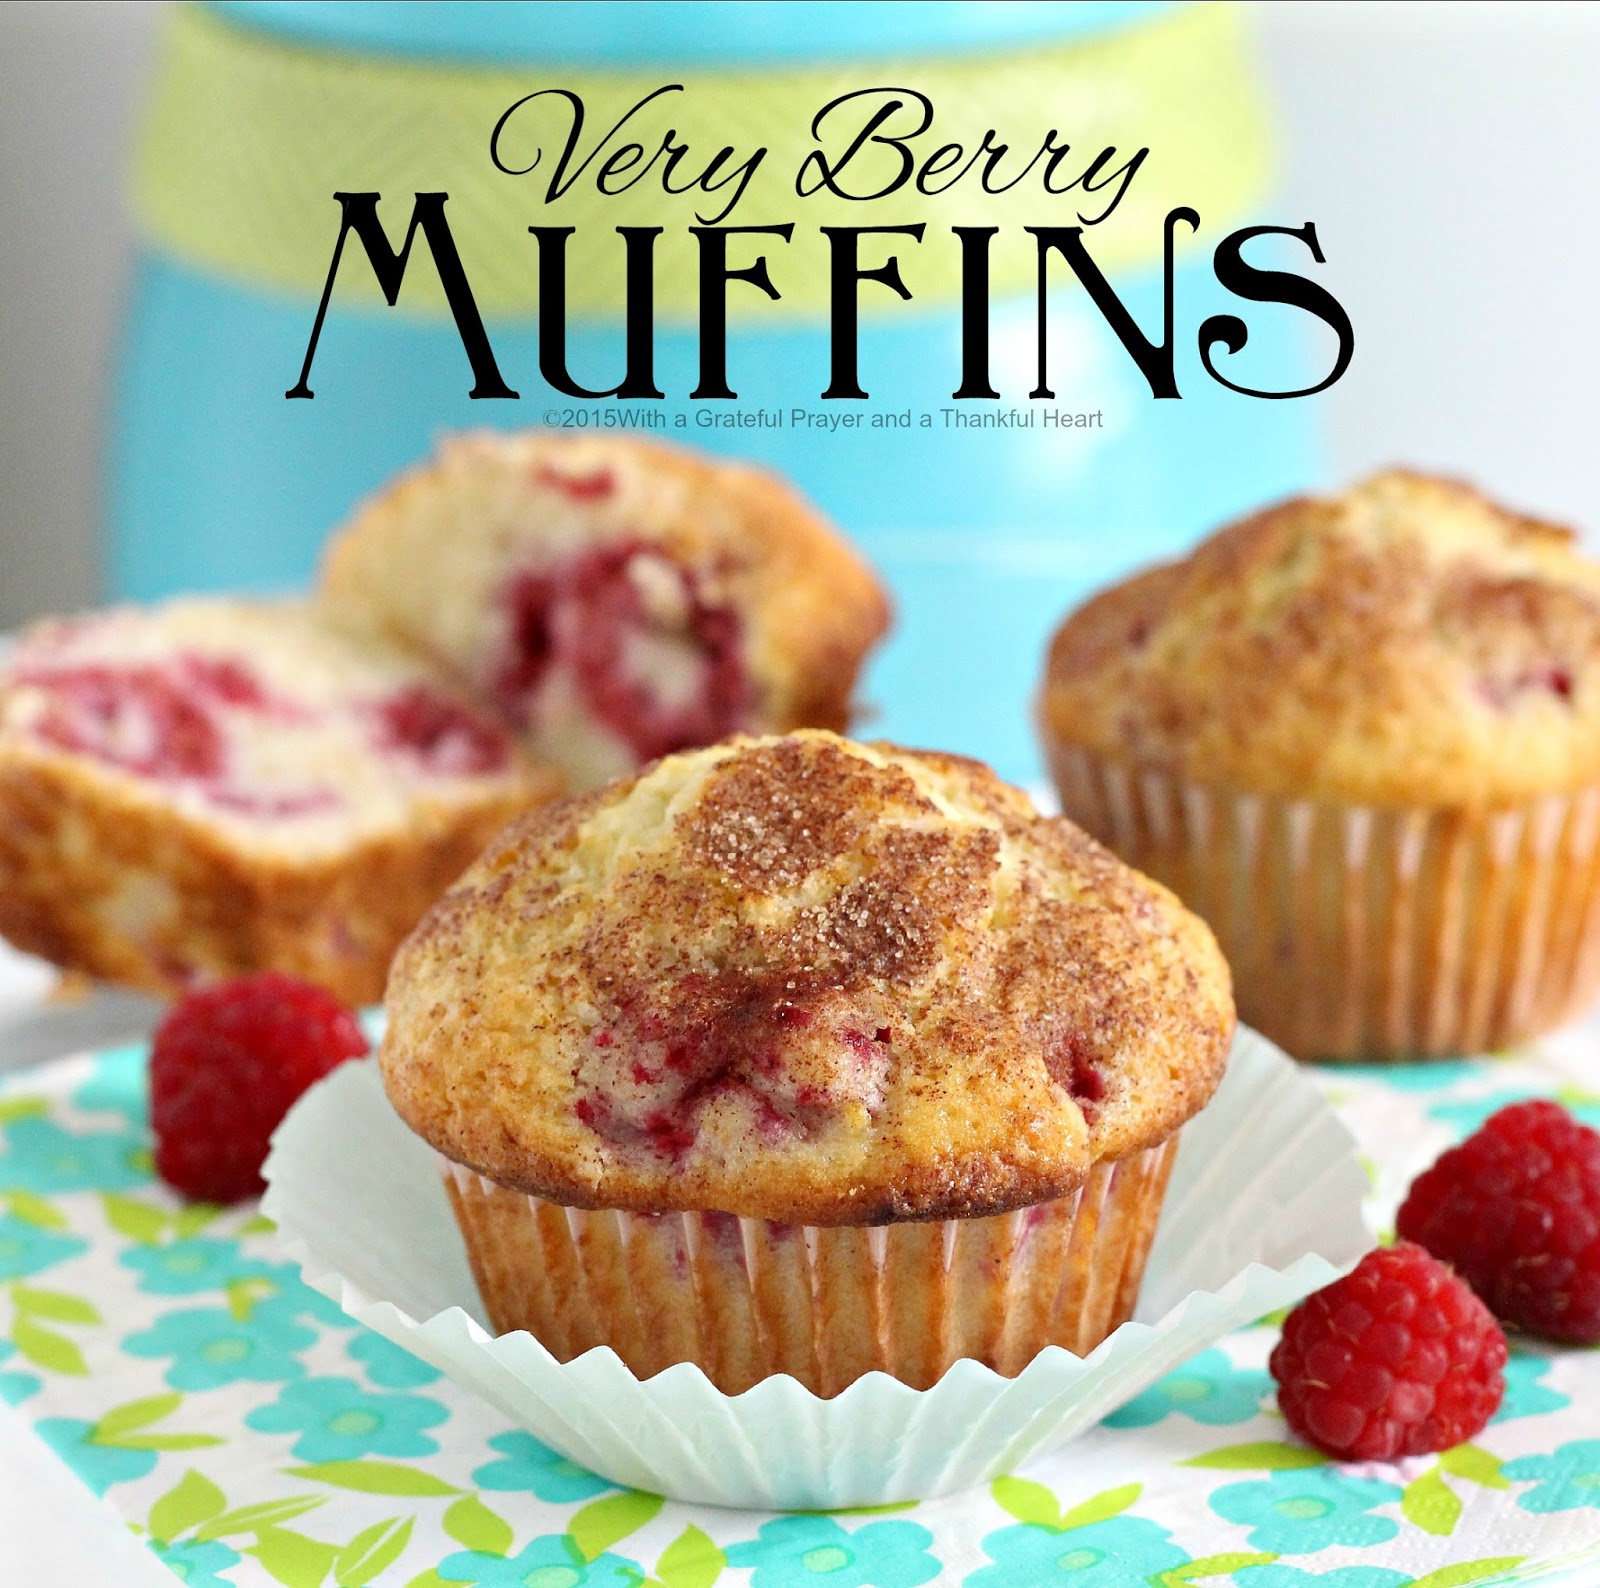 These muffins are gay